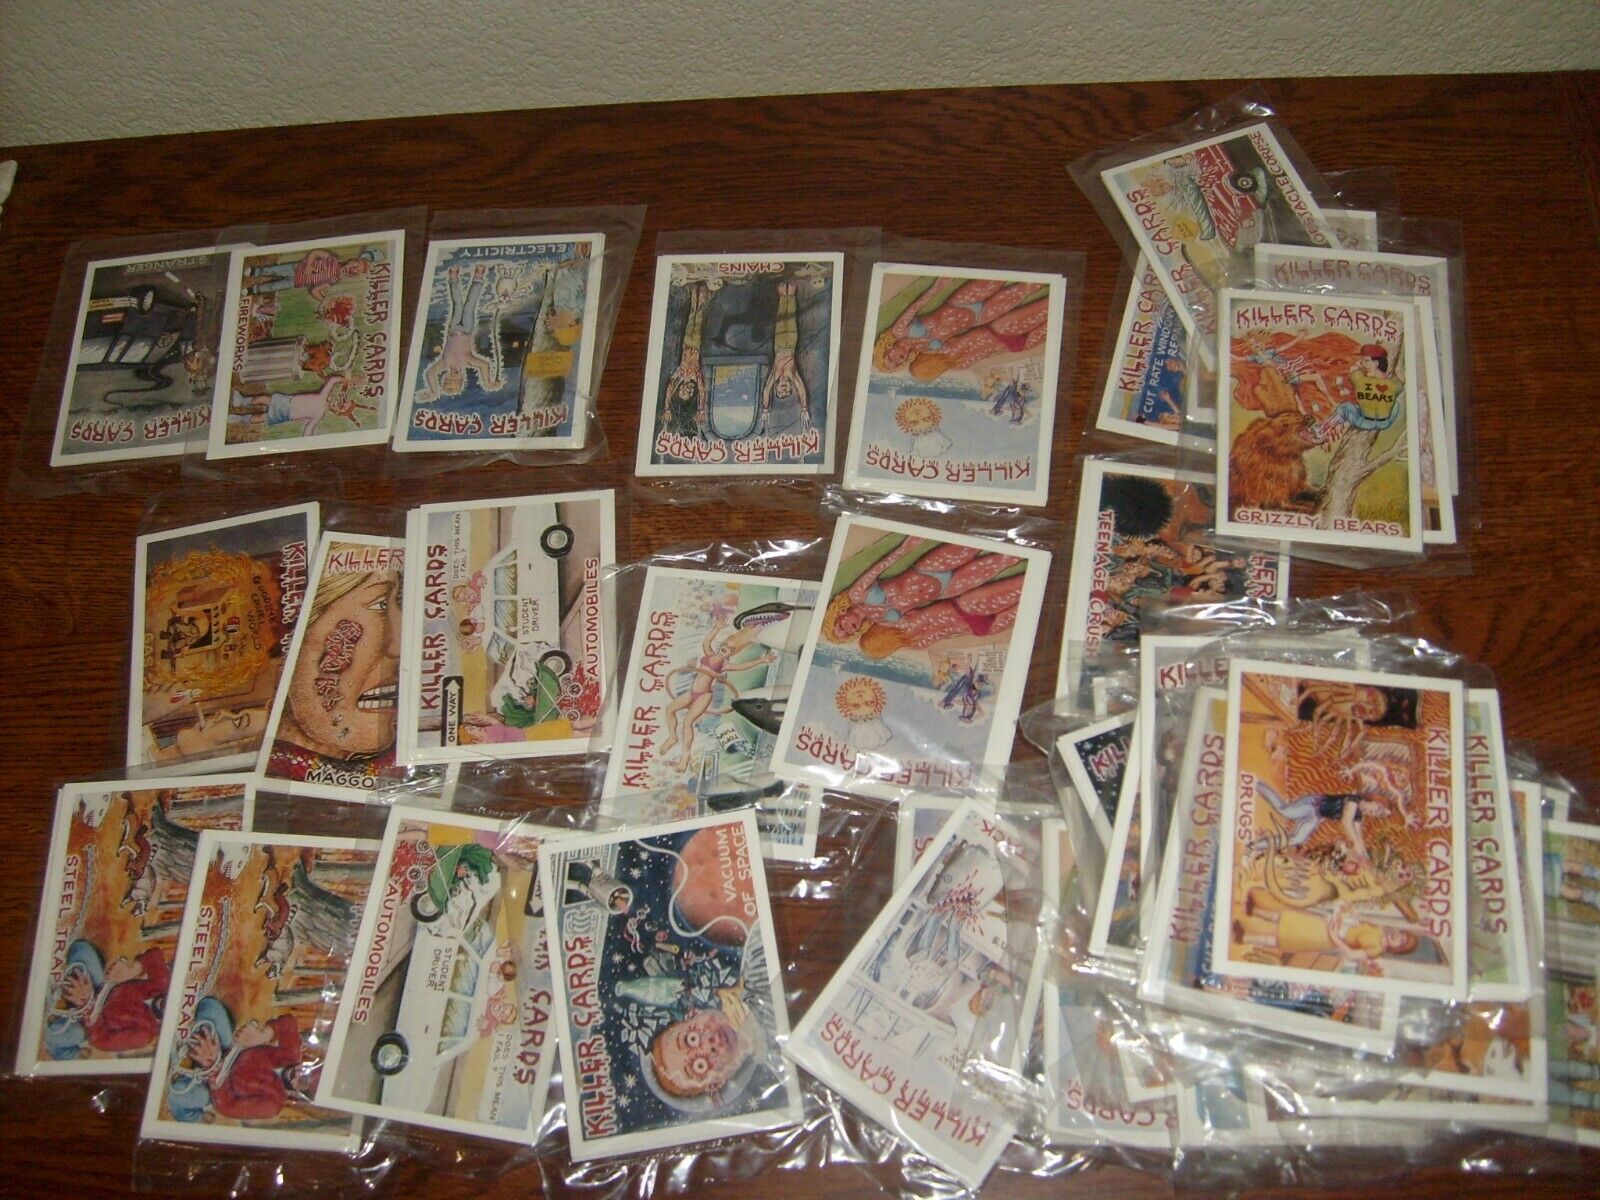 1988 KILLER CARDS, 46 PACKS. 1st series, 2nd edition